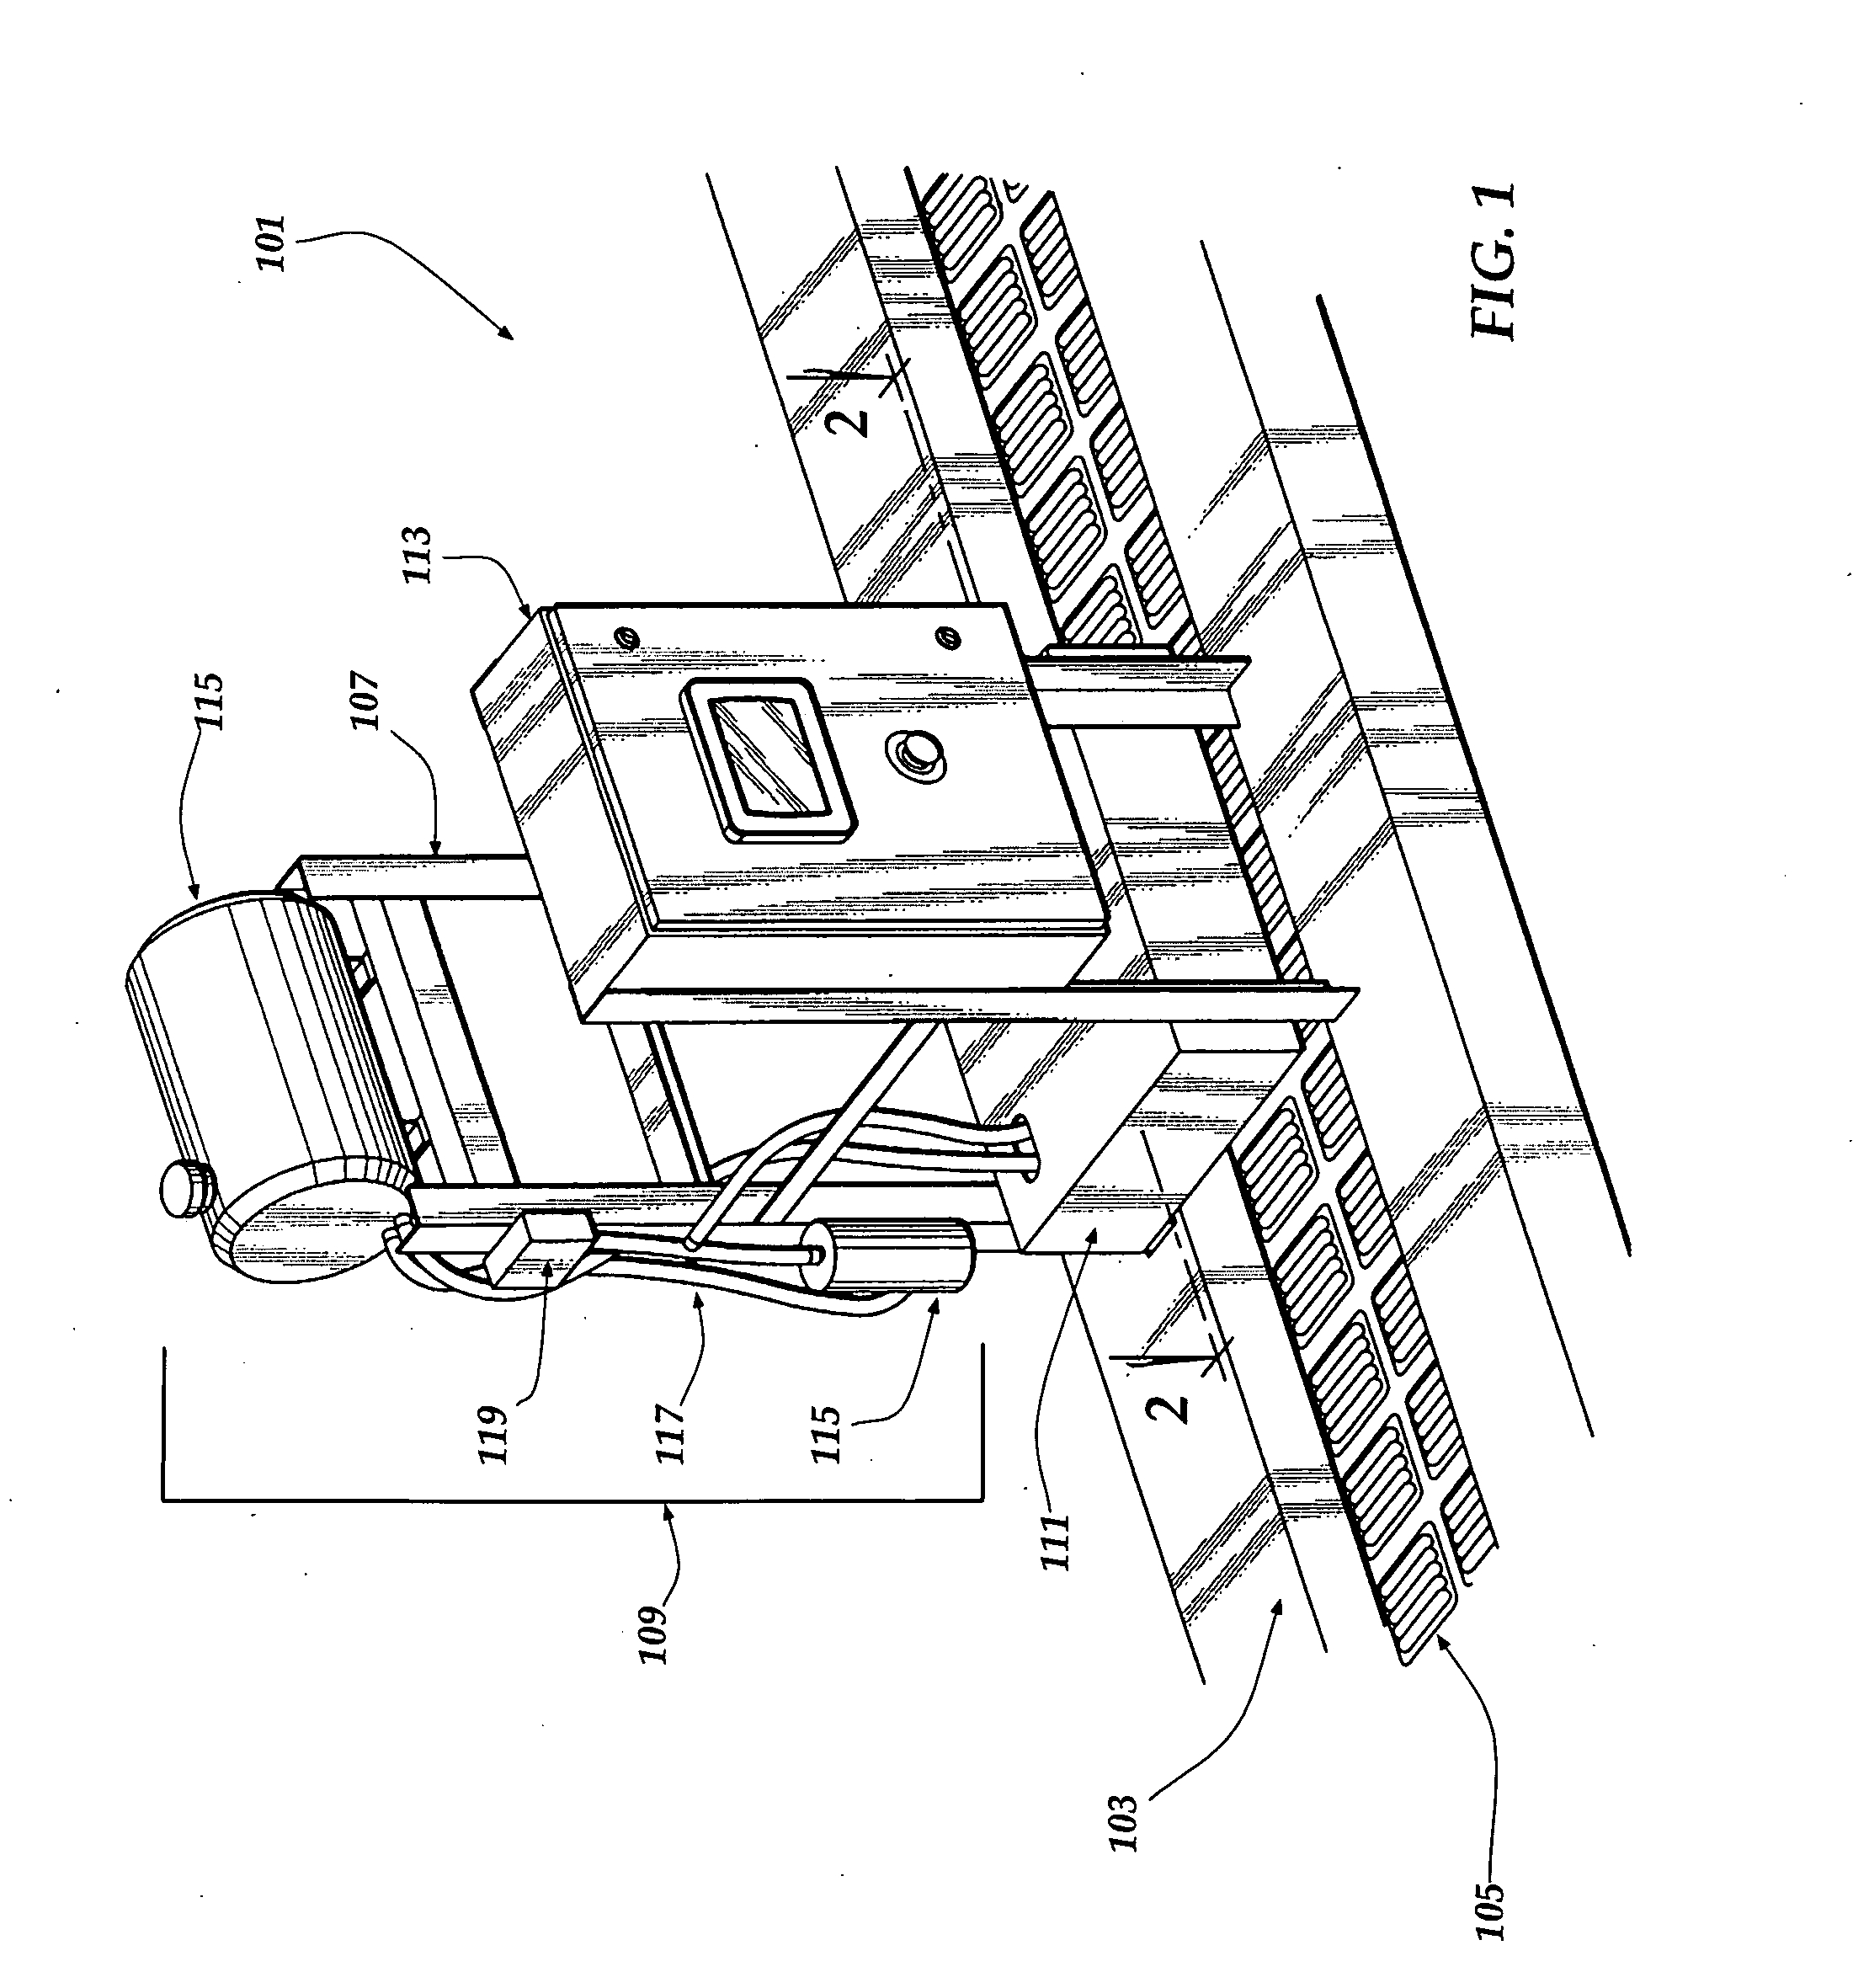 Inline antimicrobial additive treatment method and apparatus